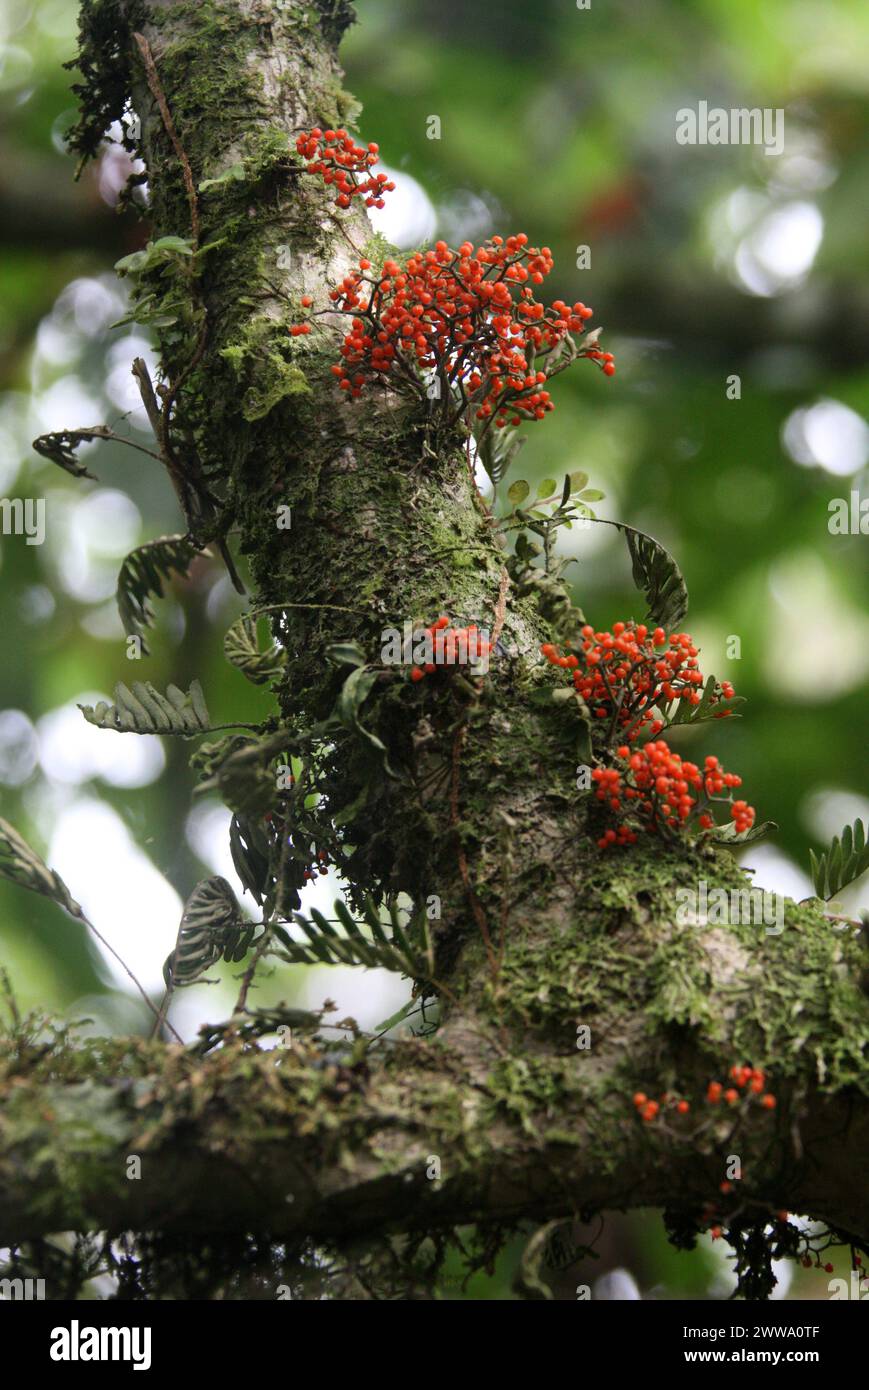 Urera species, probably Flameberry, Urera caracasana, Urticaceae. Tree with orange berries growing directly on branches and tree trunk.  Costa Rica. Stock Photo